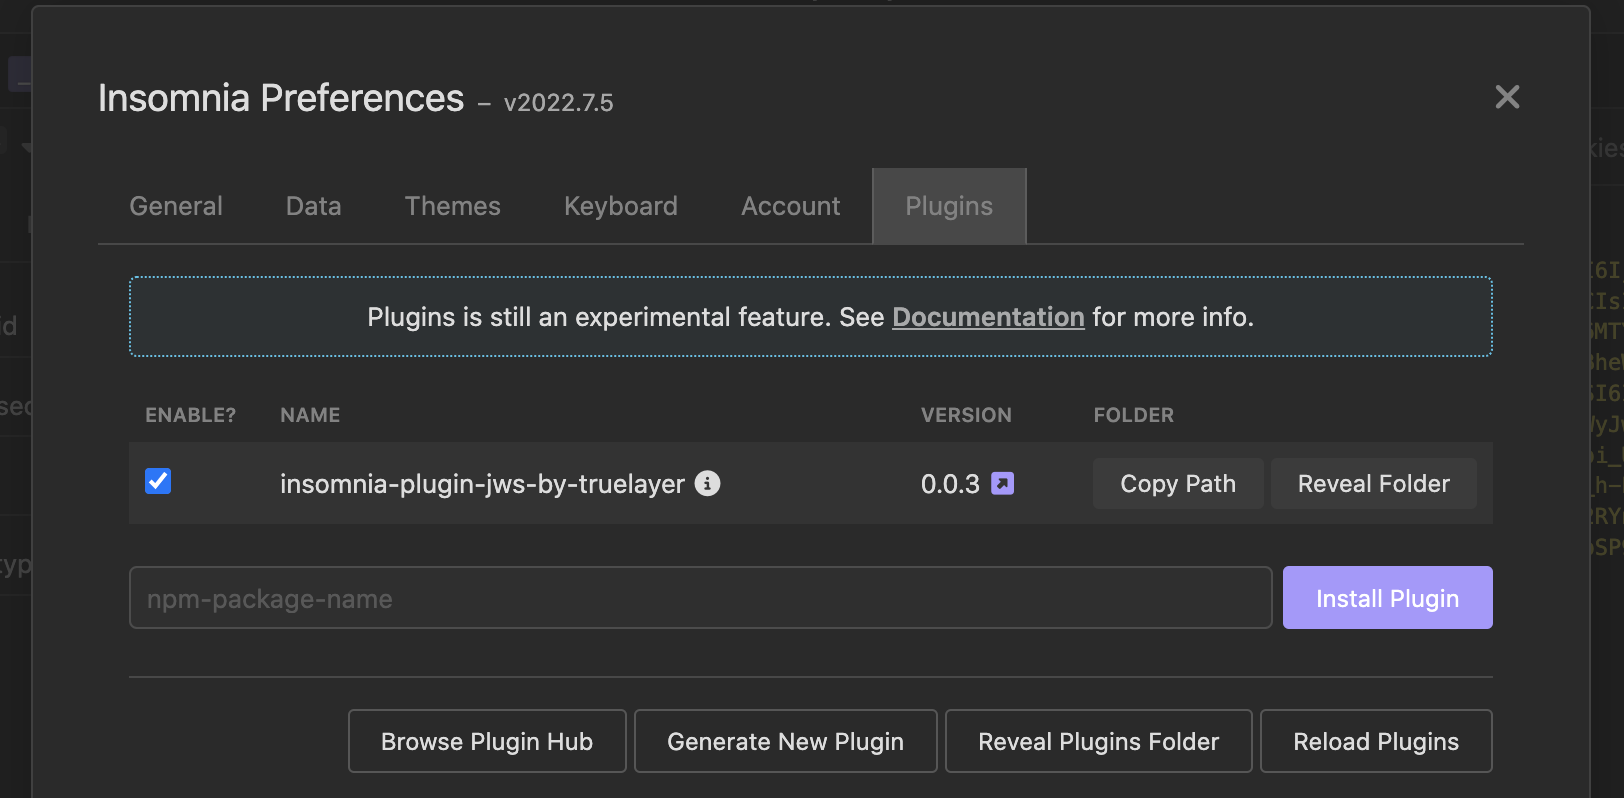 When the plugin is installed correctly, the Plugins tab looks like this.